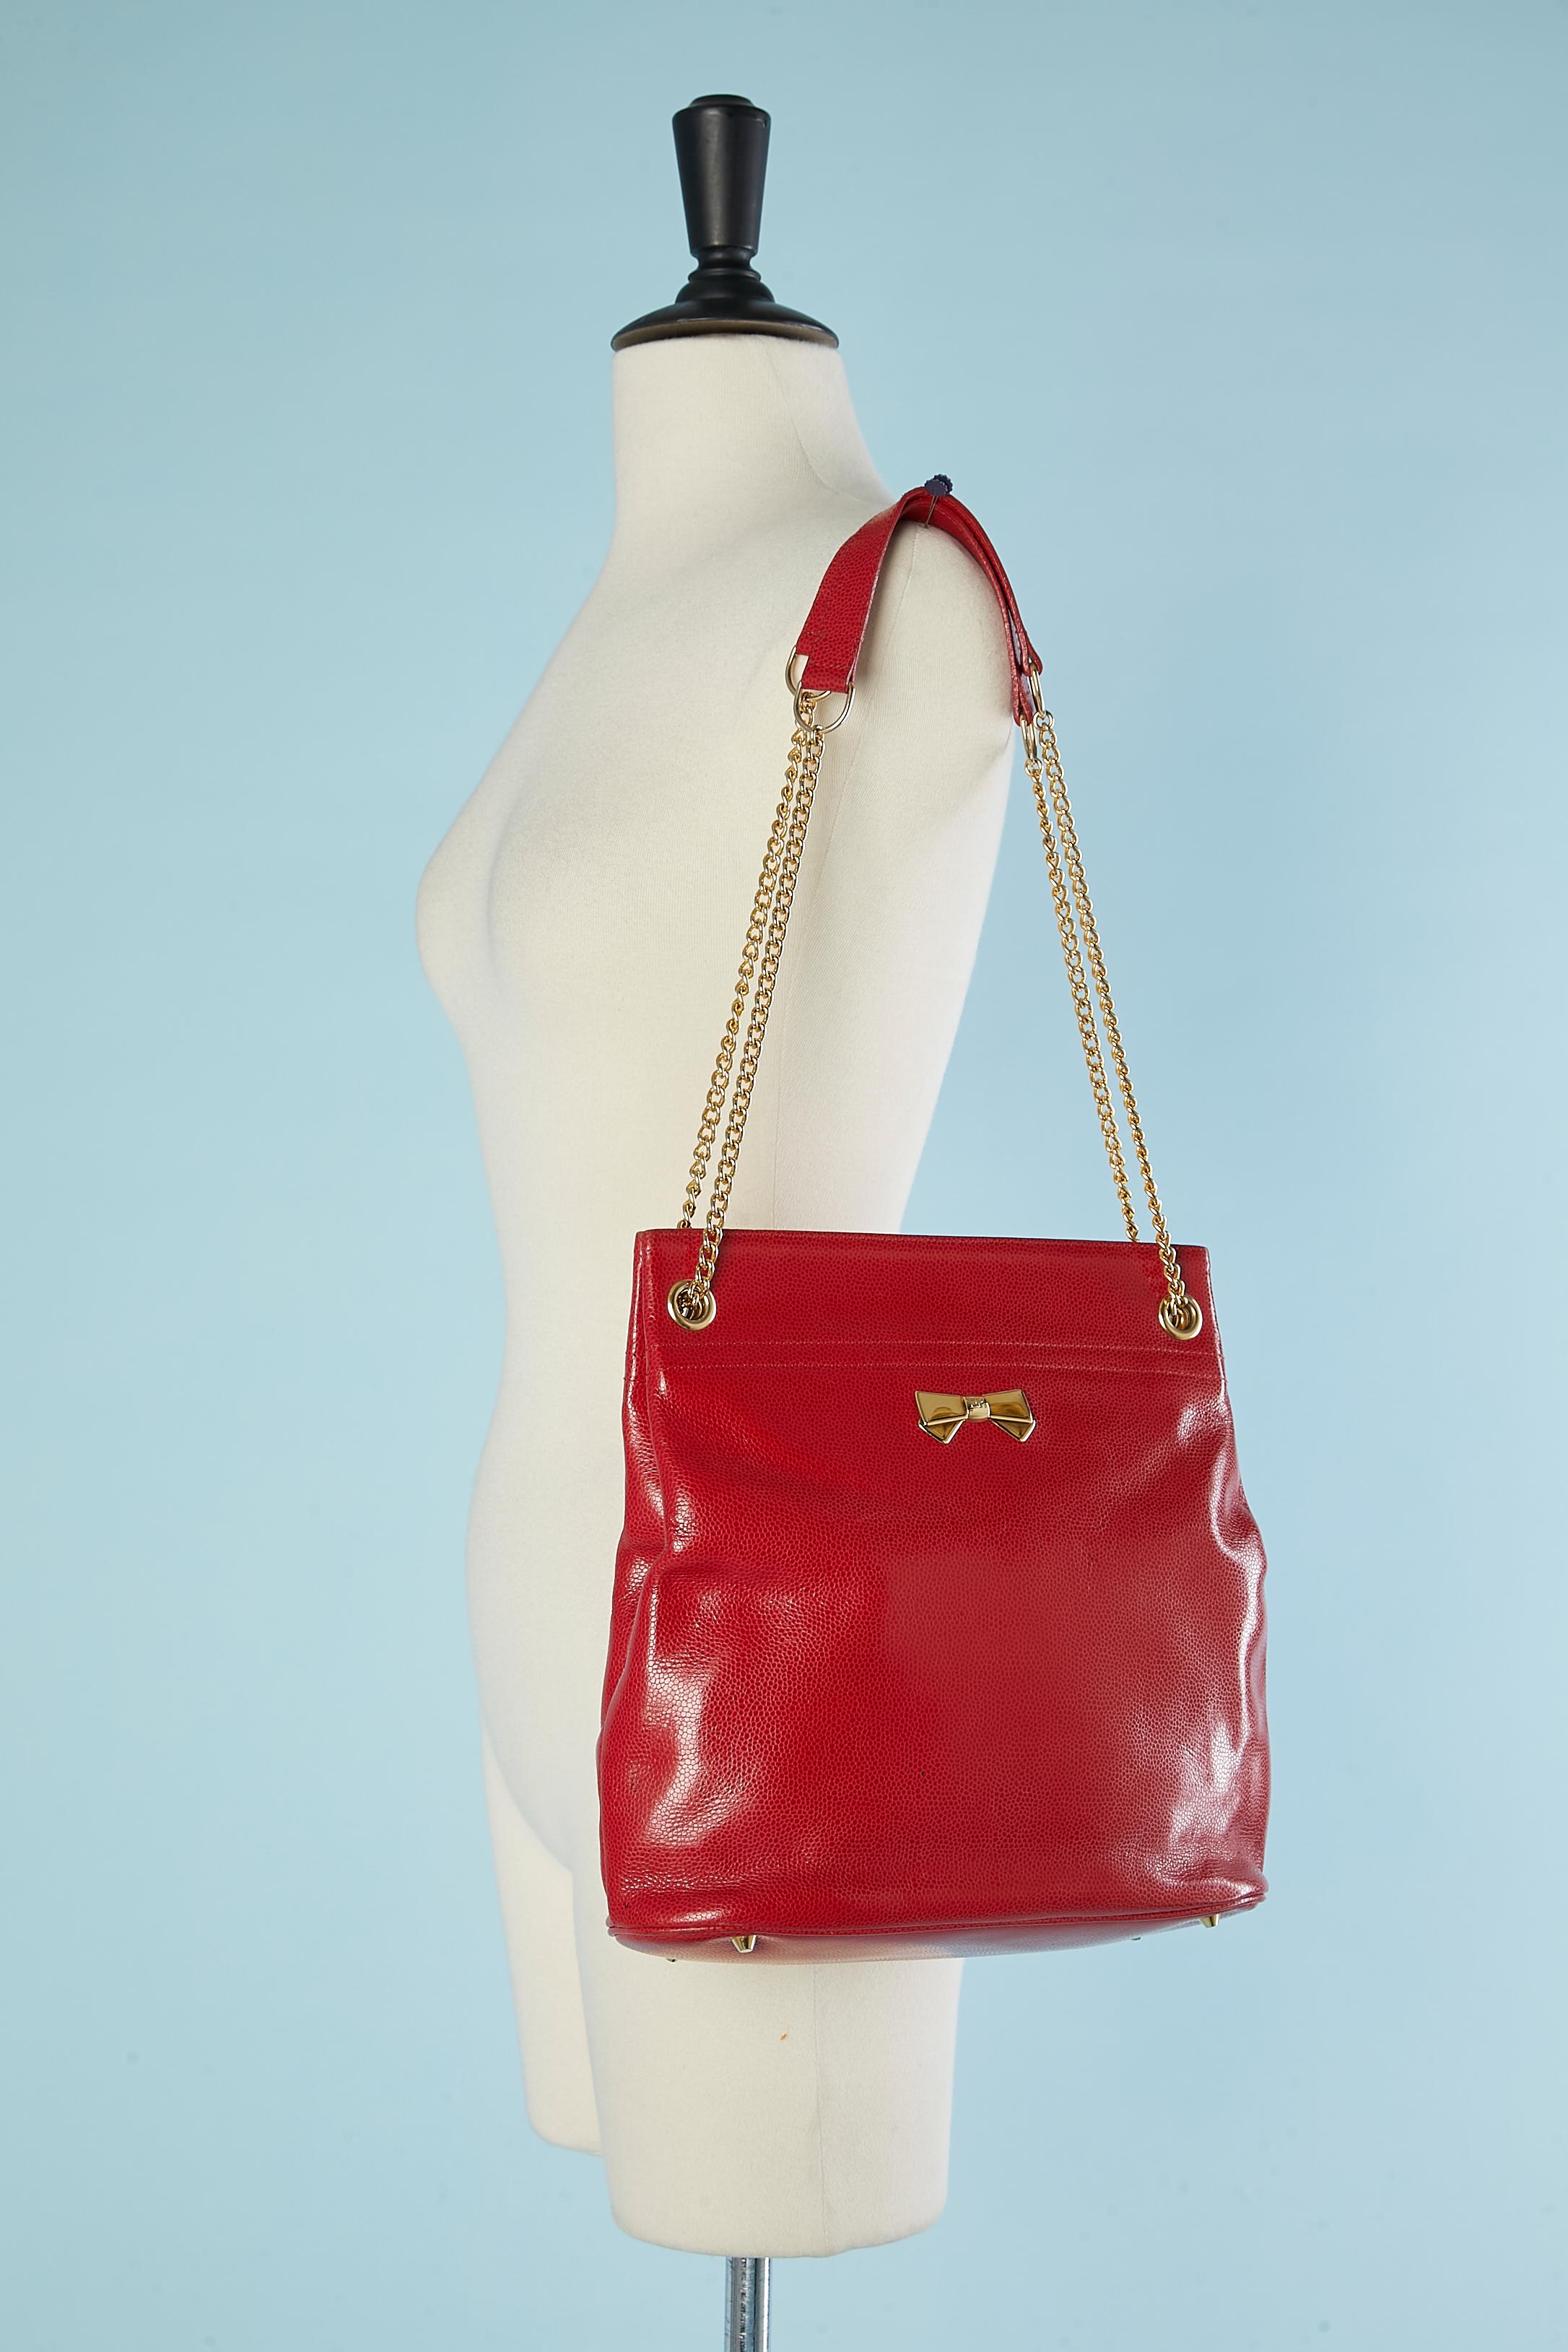 Red shiny leather shoulder bag with gold metal chain and bow Nina Ricci 1980's  For Sale 1